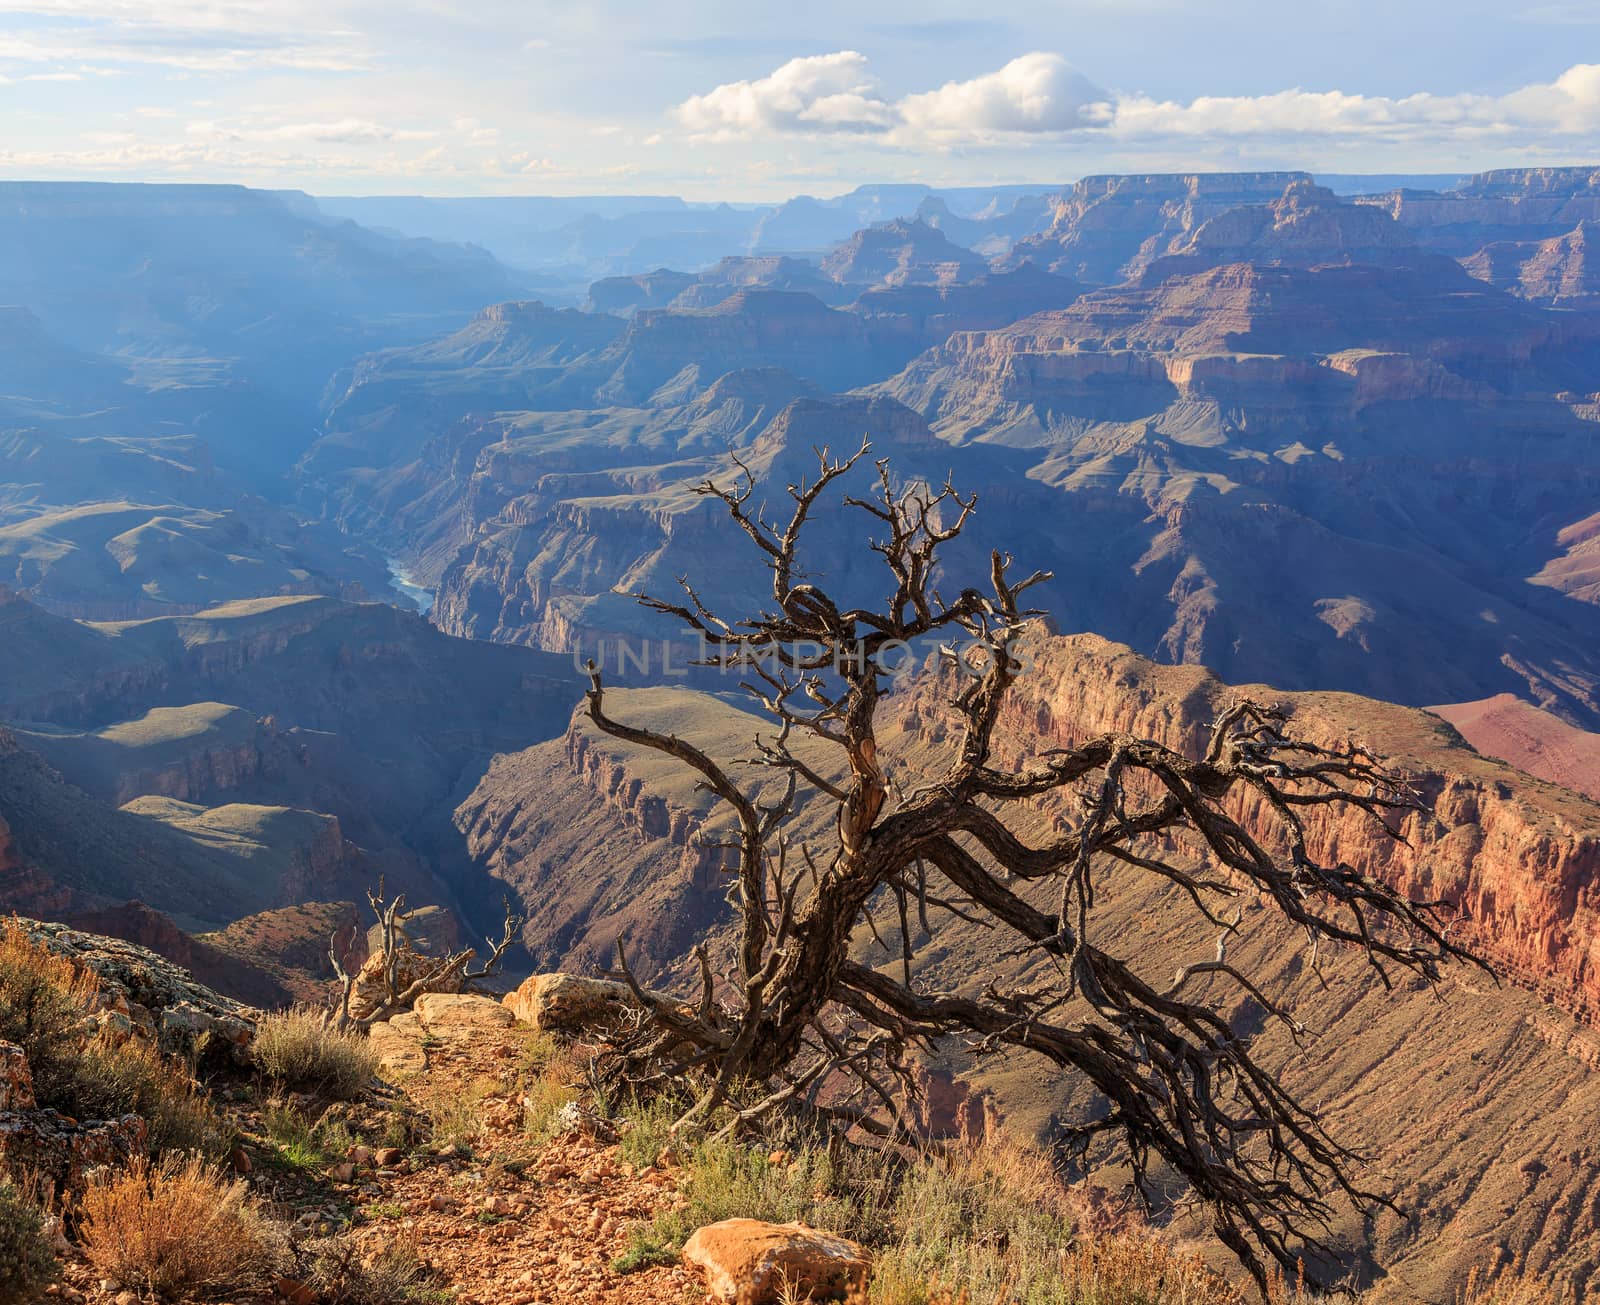 Dead dry tree on the Grand Canyon cliff, Arizona, United States